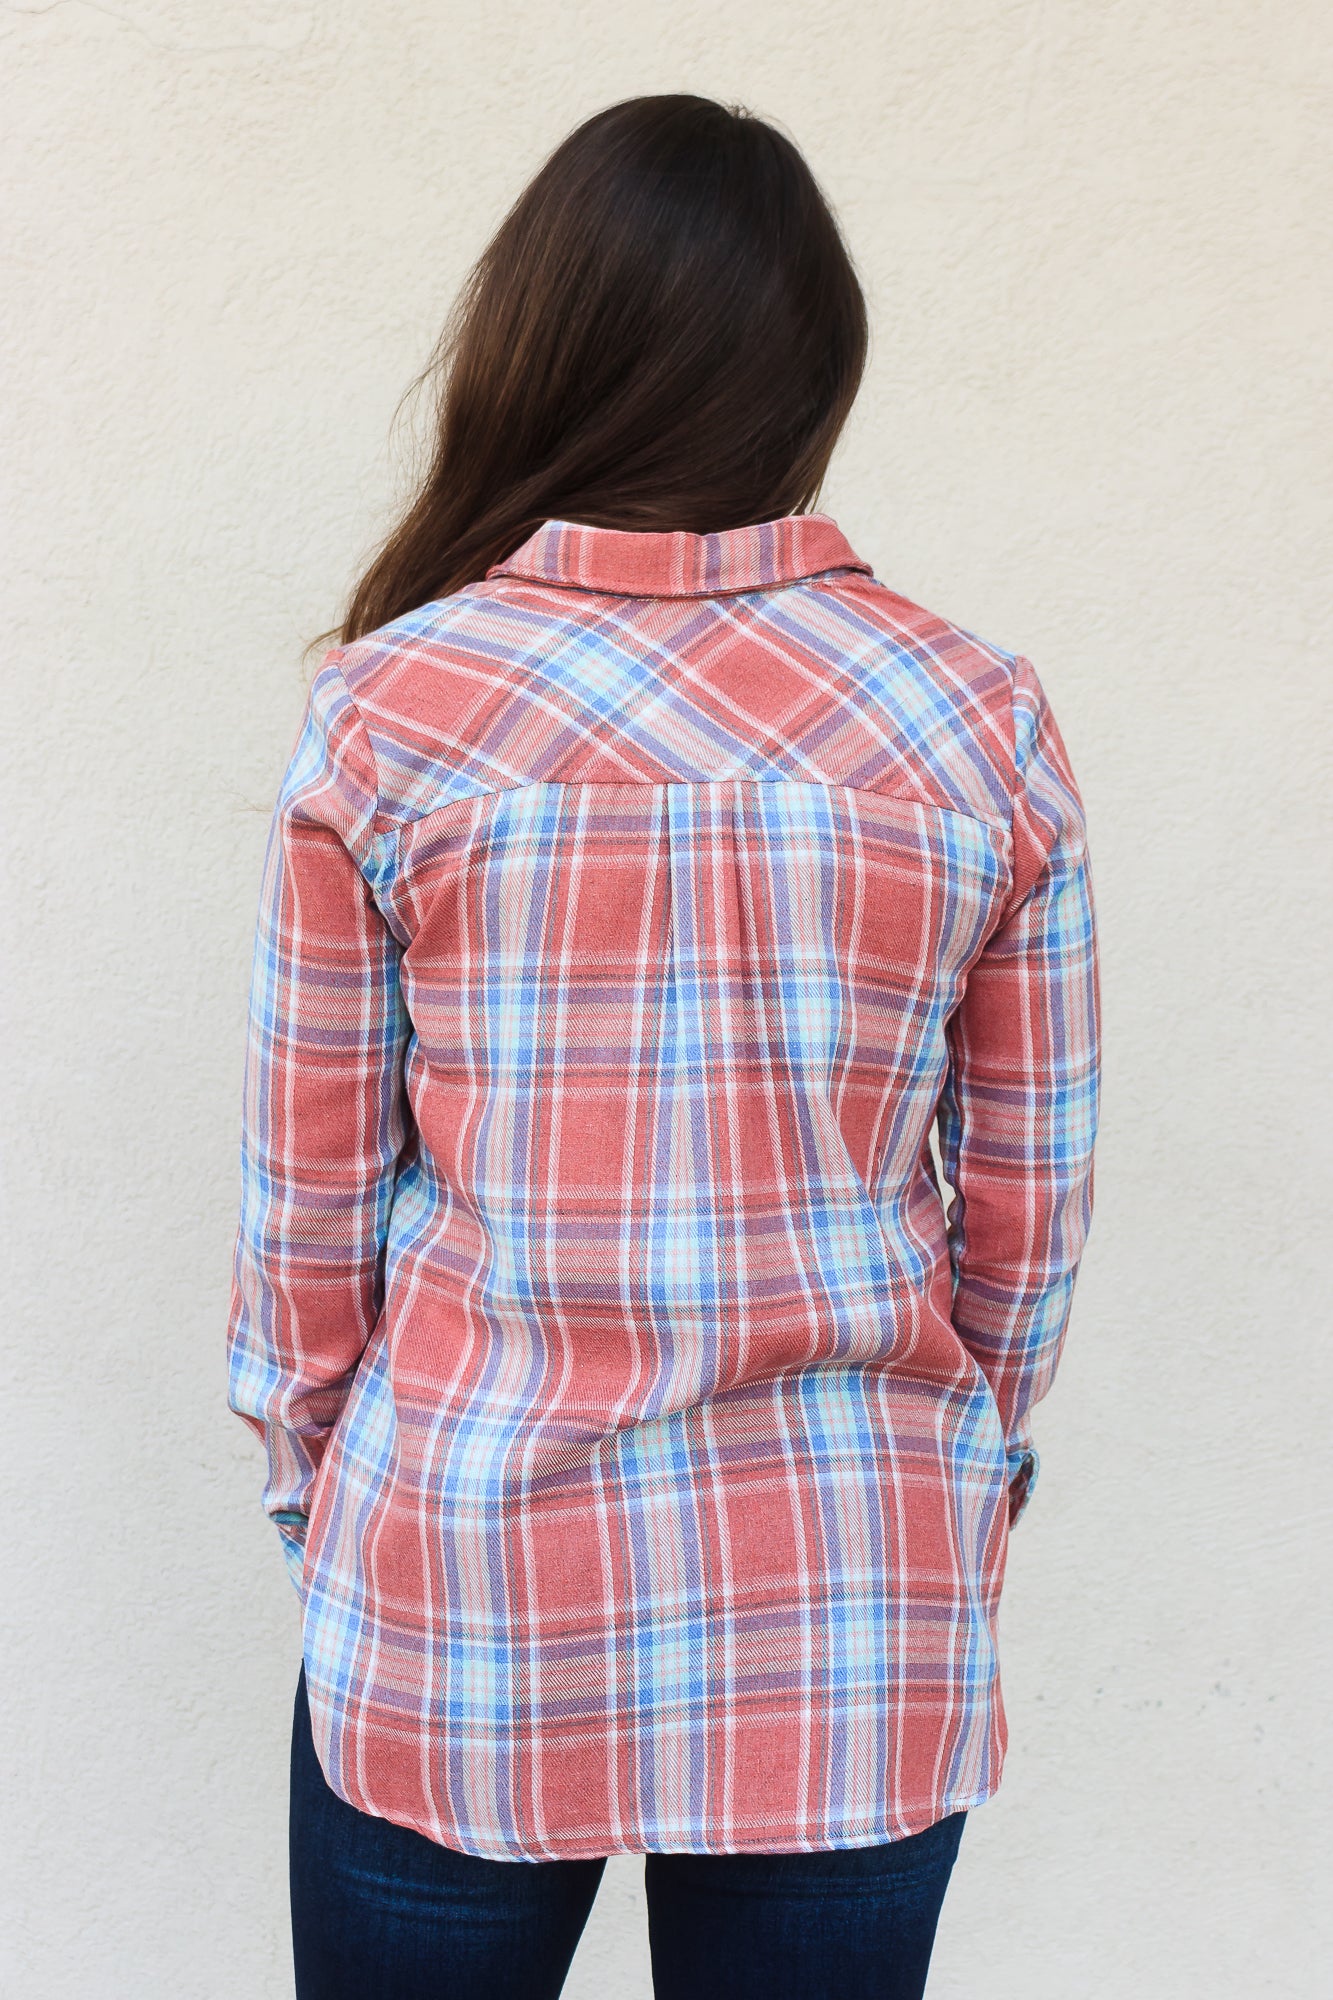 Andi Flannel Top